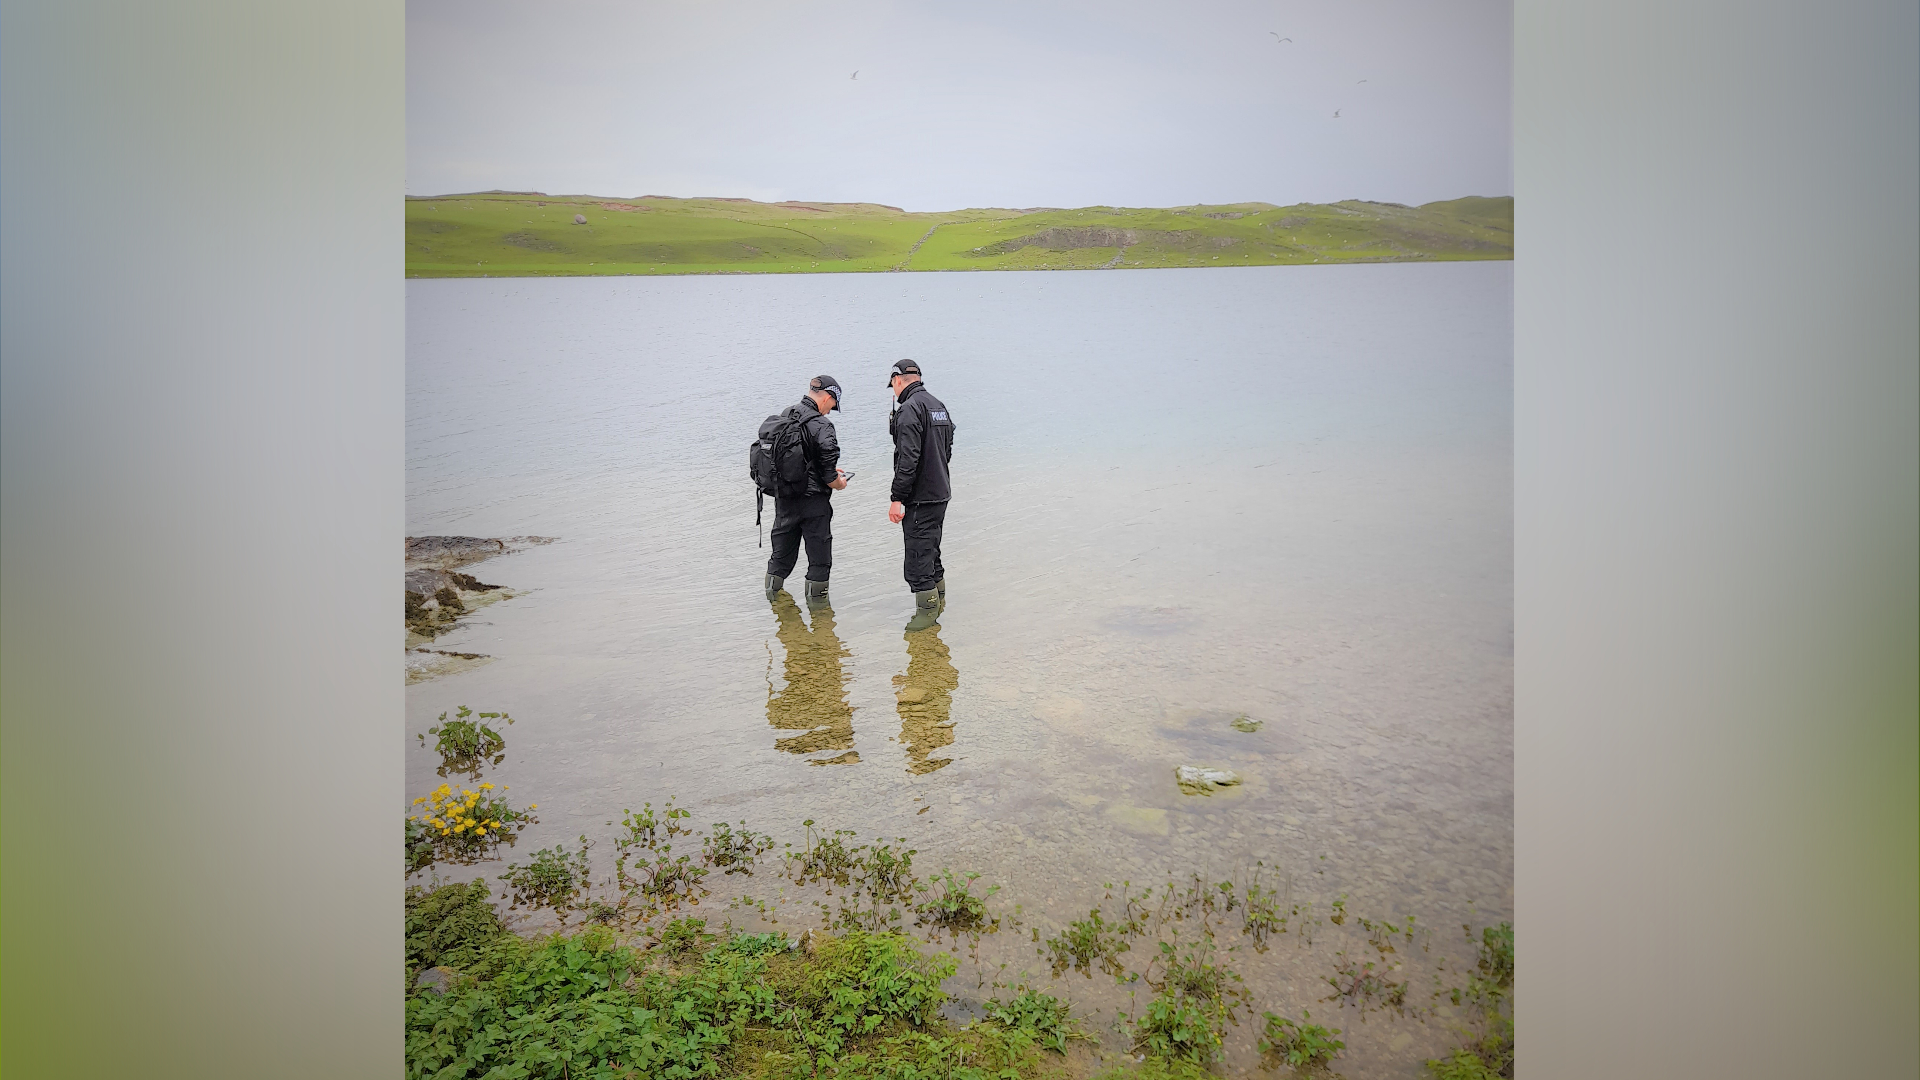 Police tried to recover protected eggs from the water.